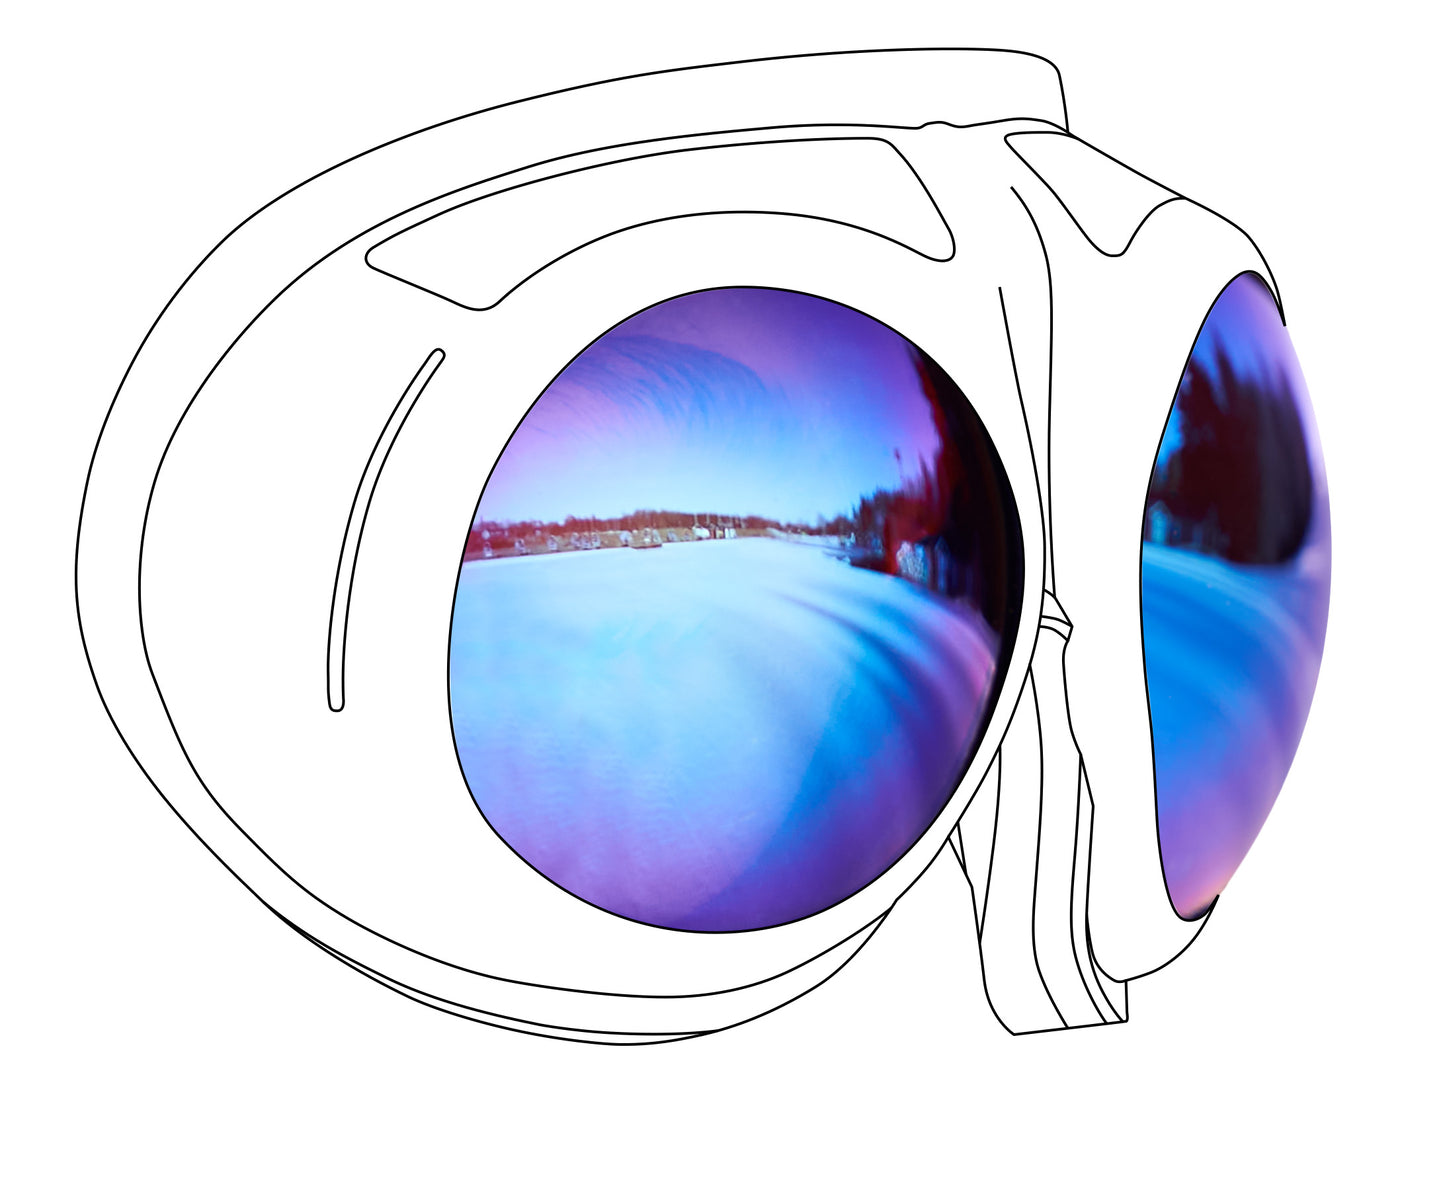 Zeiss orange extra high contrast lenses with blue mirror for Fluga goggles.